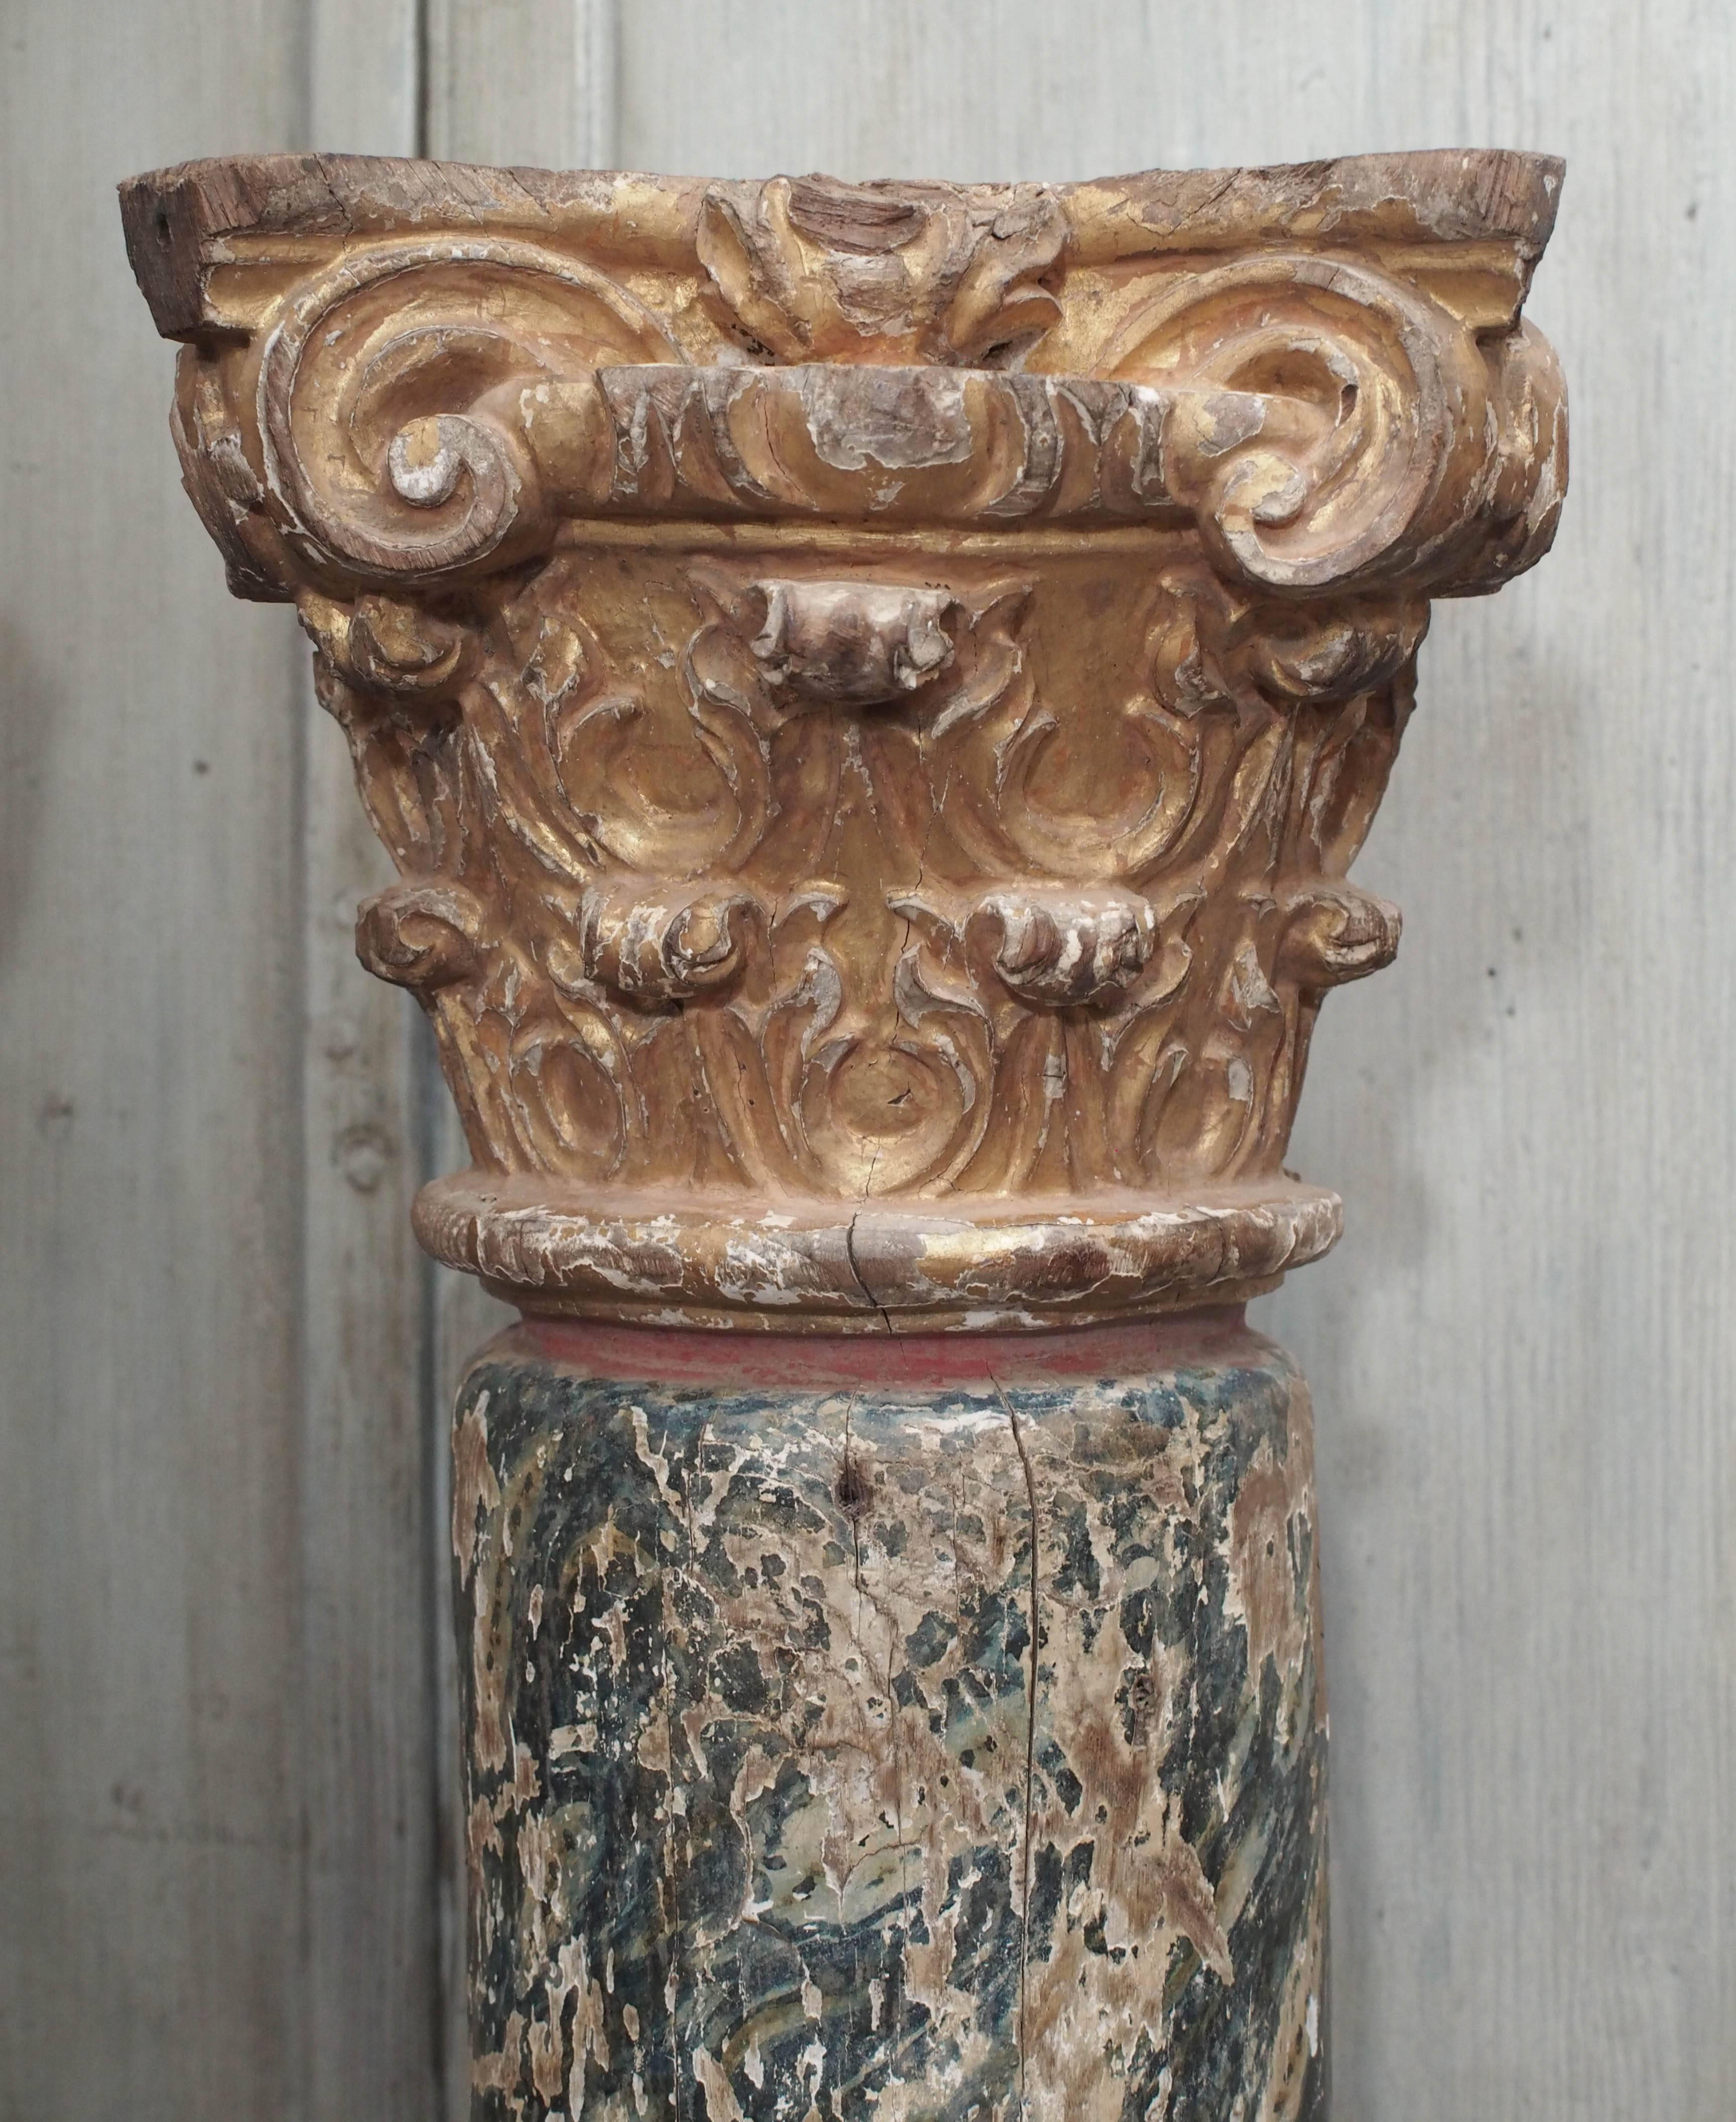 17th century hand-carved, painted wooden columns. Dimensions are as follows: 62” H x 9” W at the cap (widest point).

The columns have a circumference of 26”.
 